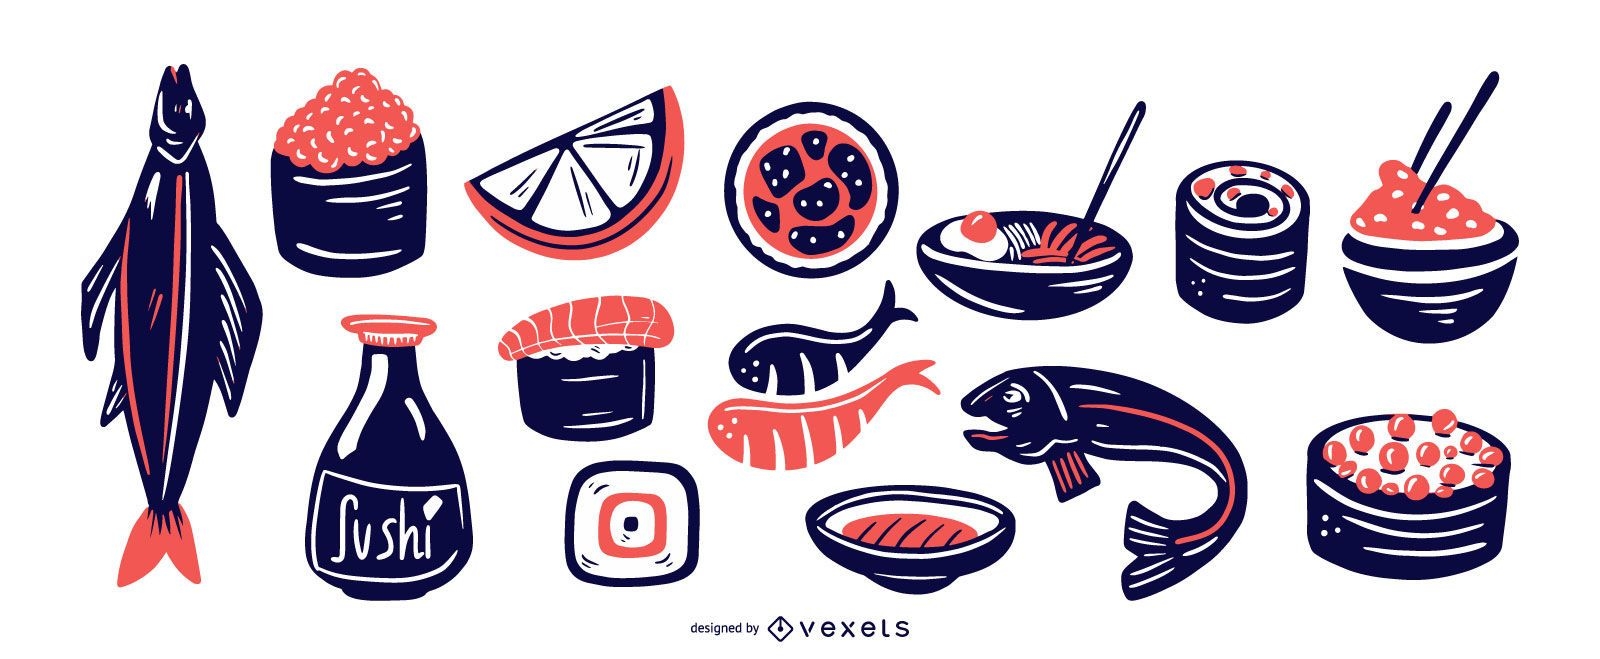 Duotone Japanese Food Elements Pack